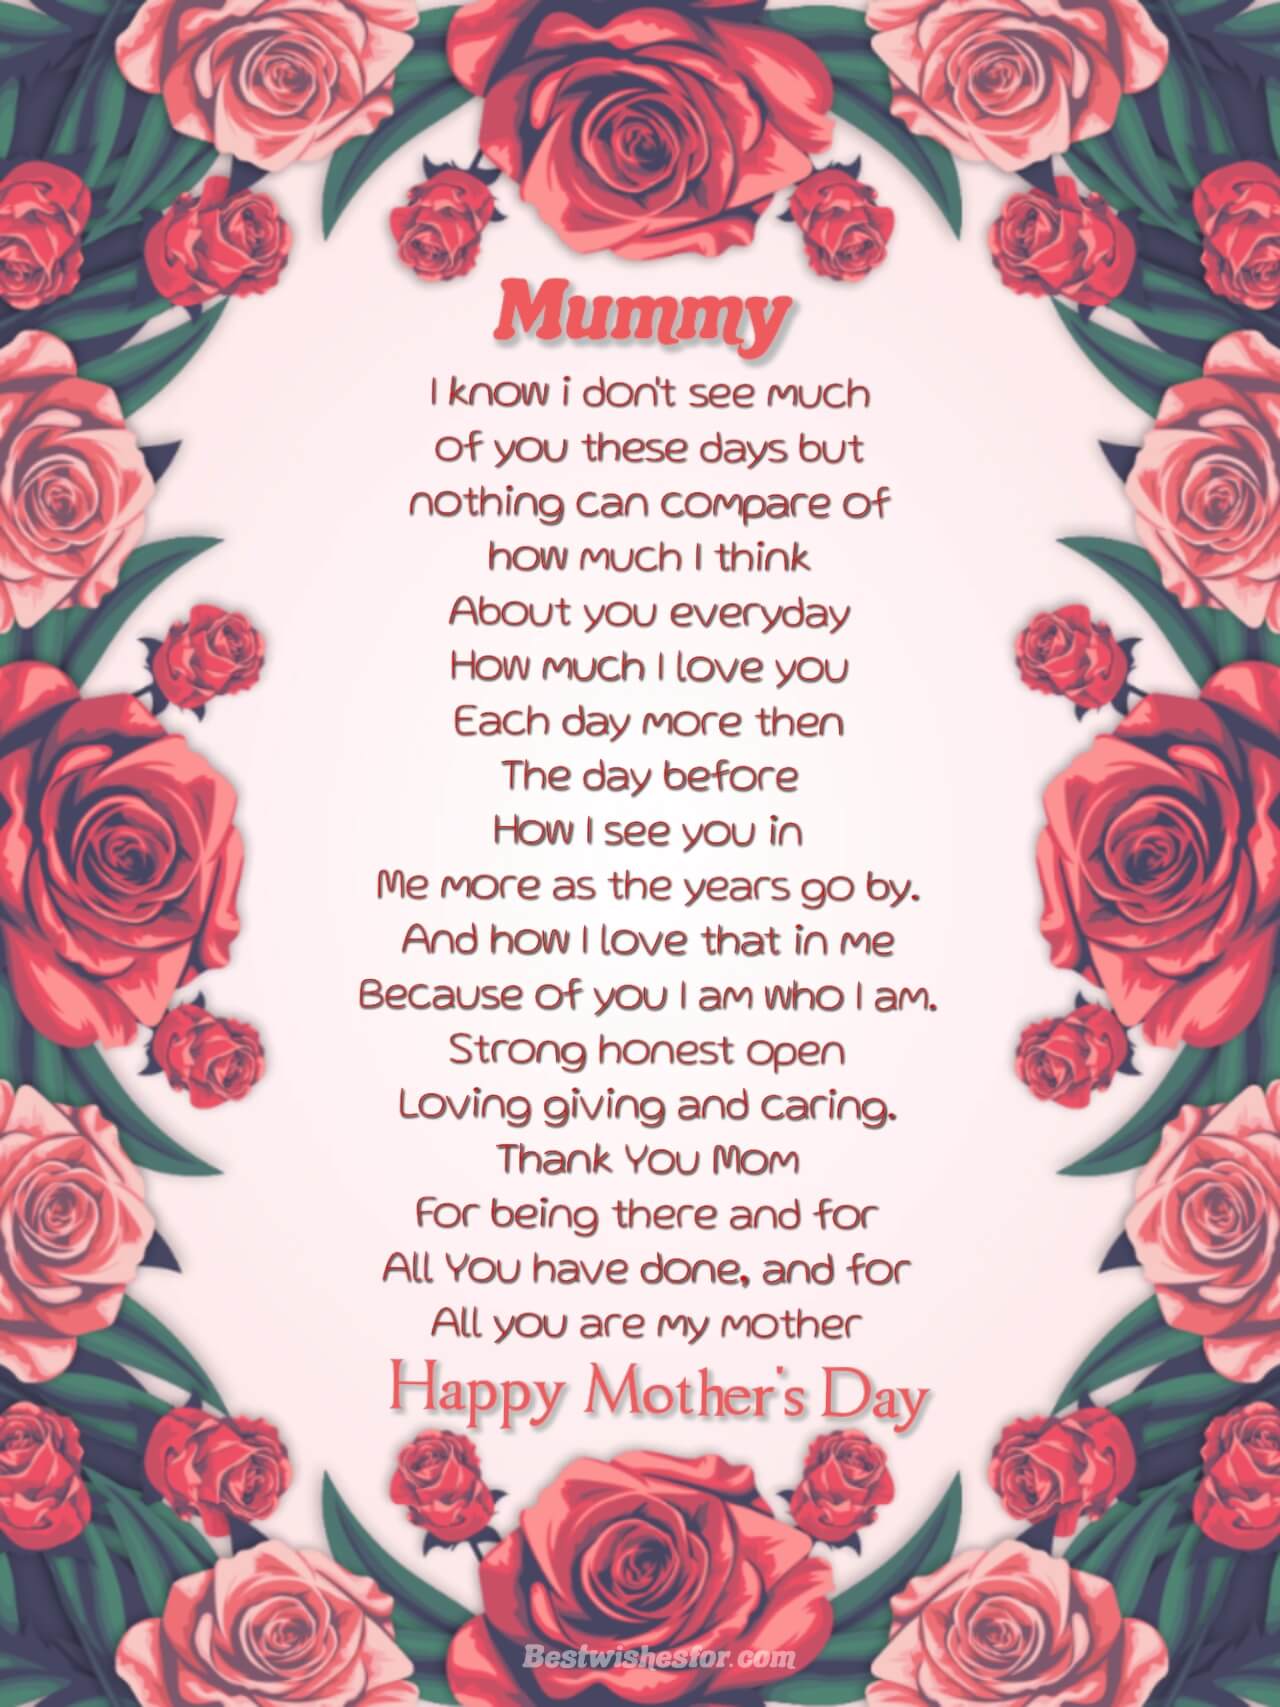 Happy Mother’s Day 2022 Beautiful Poems Images | Best Wishes